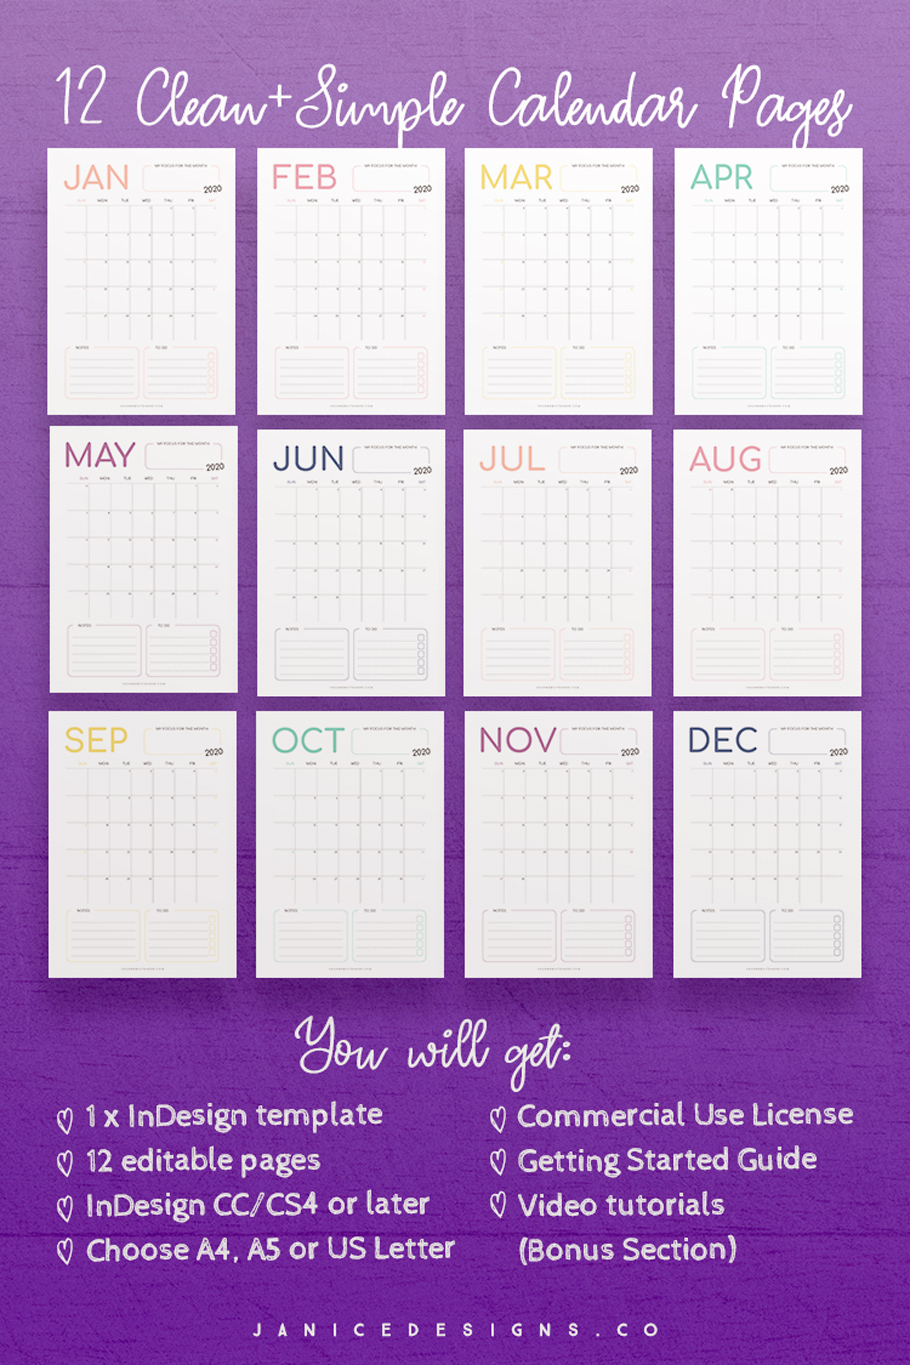 2020 Calendar Indesign Template For Commercial Use